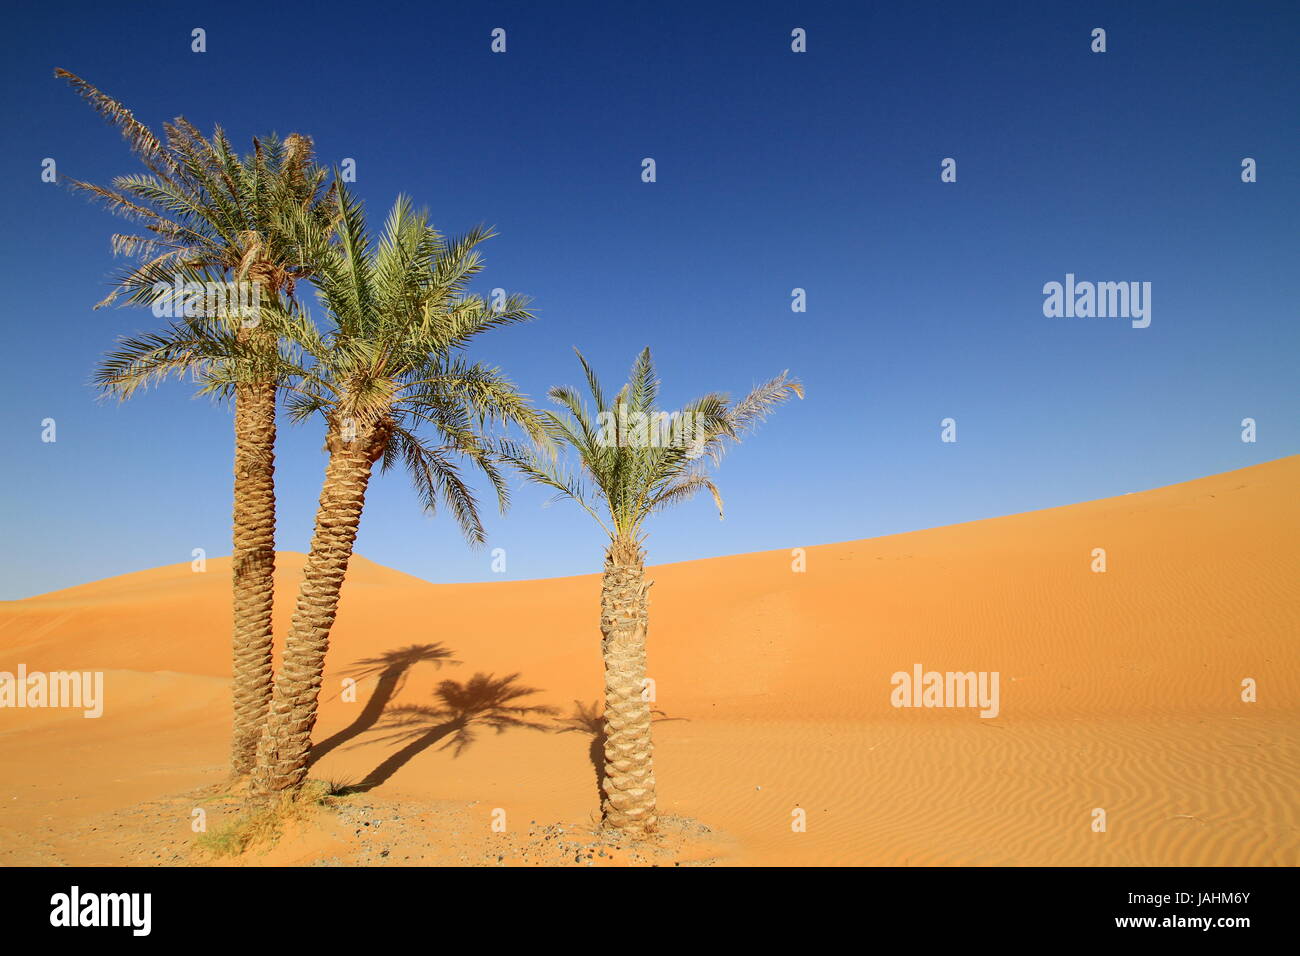 palm trees in the desert Stock Photo